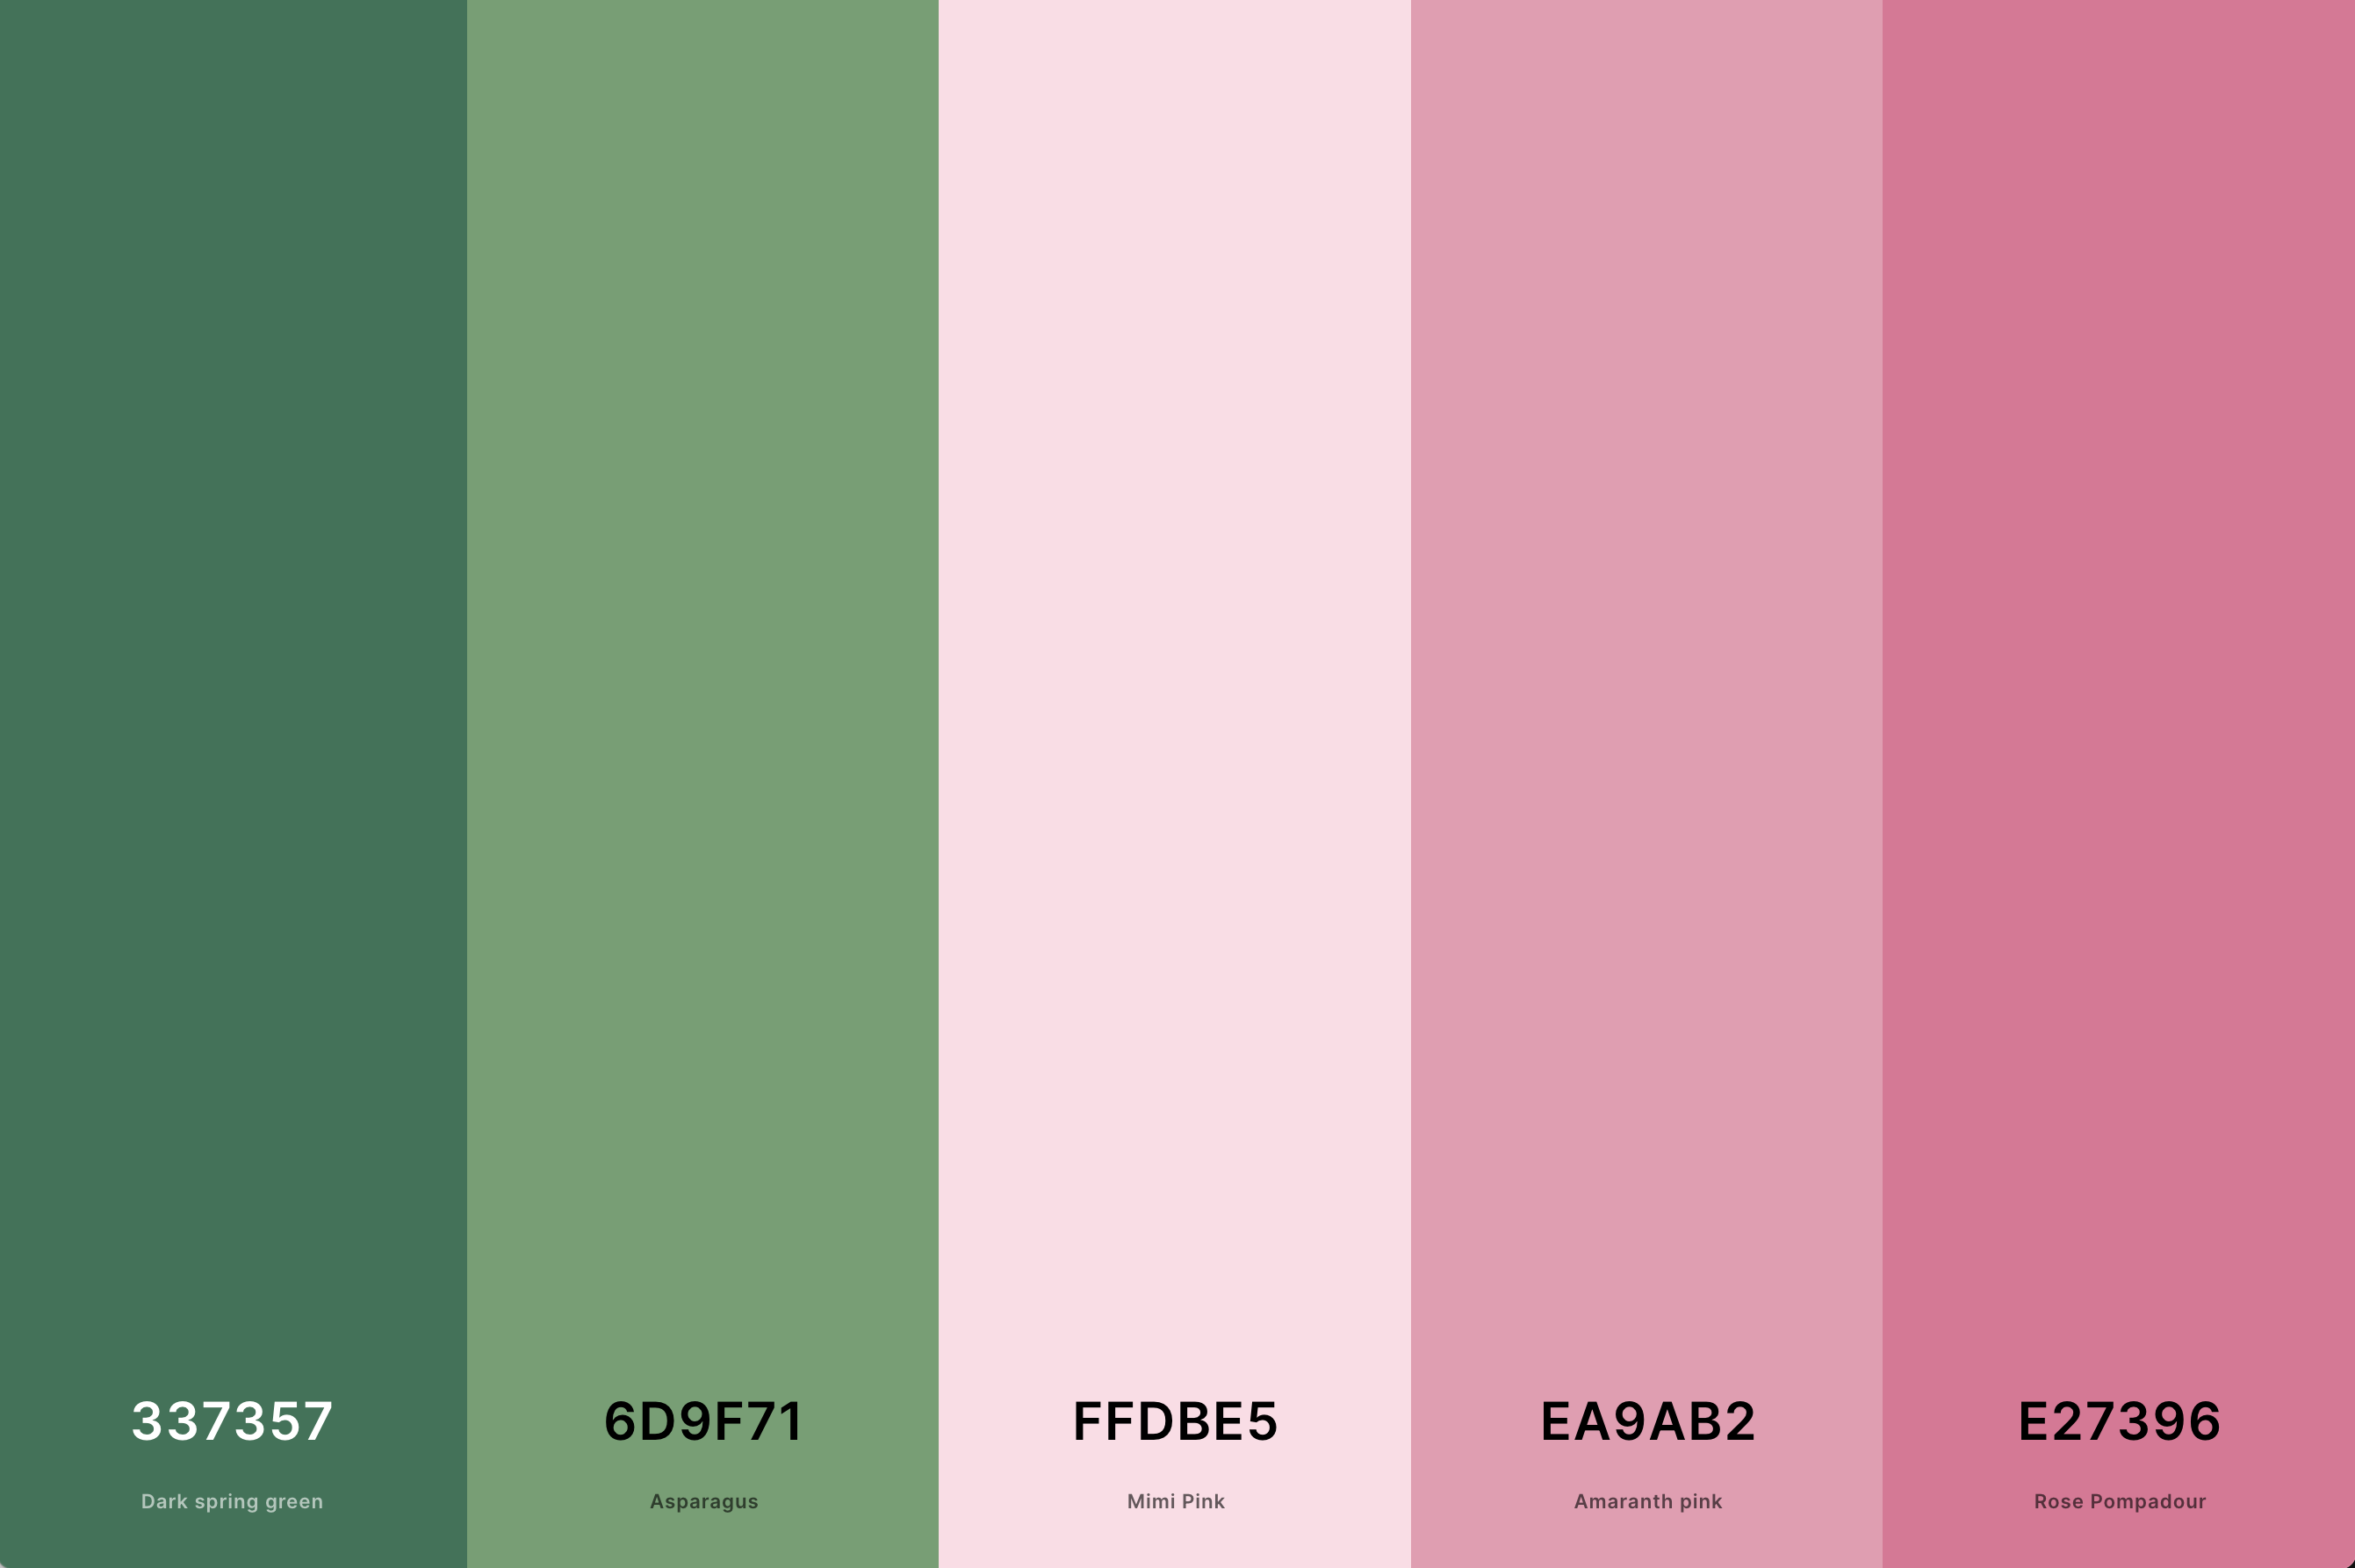 1. Pink And Green Color Palette Color Palette with Dark Spring Green (Hex #337357) + Asparagus (Hex #6D9F71) + Mimi Pink (Hex #FFDBE5) + Amaranth Pink (Hex #EA9AB2) + Rose Pompadour (Hex #E27396) Color Palette with Hex Codes